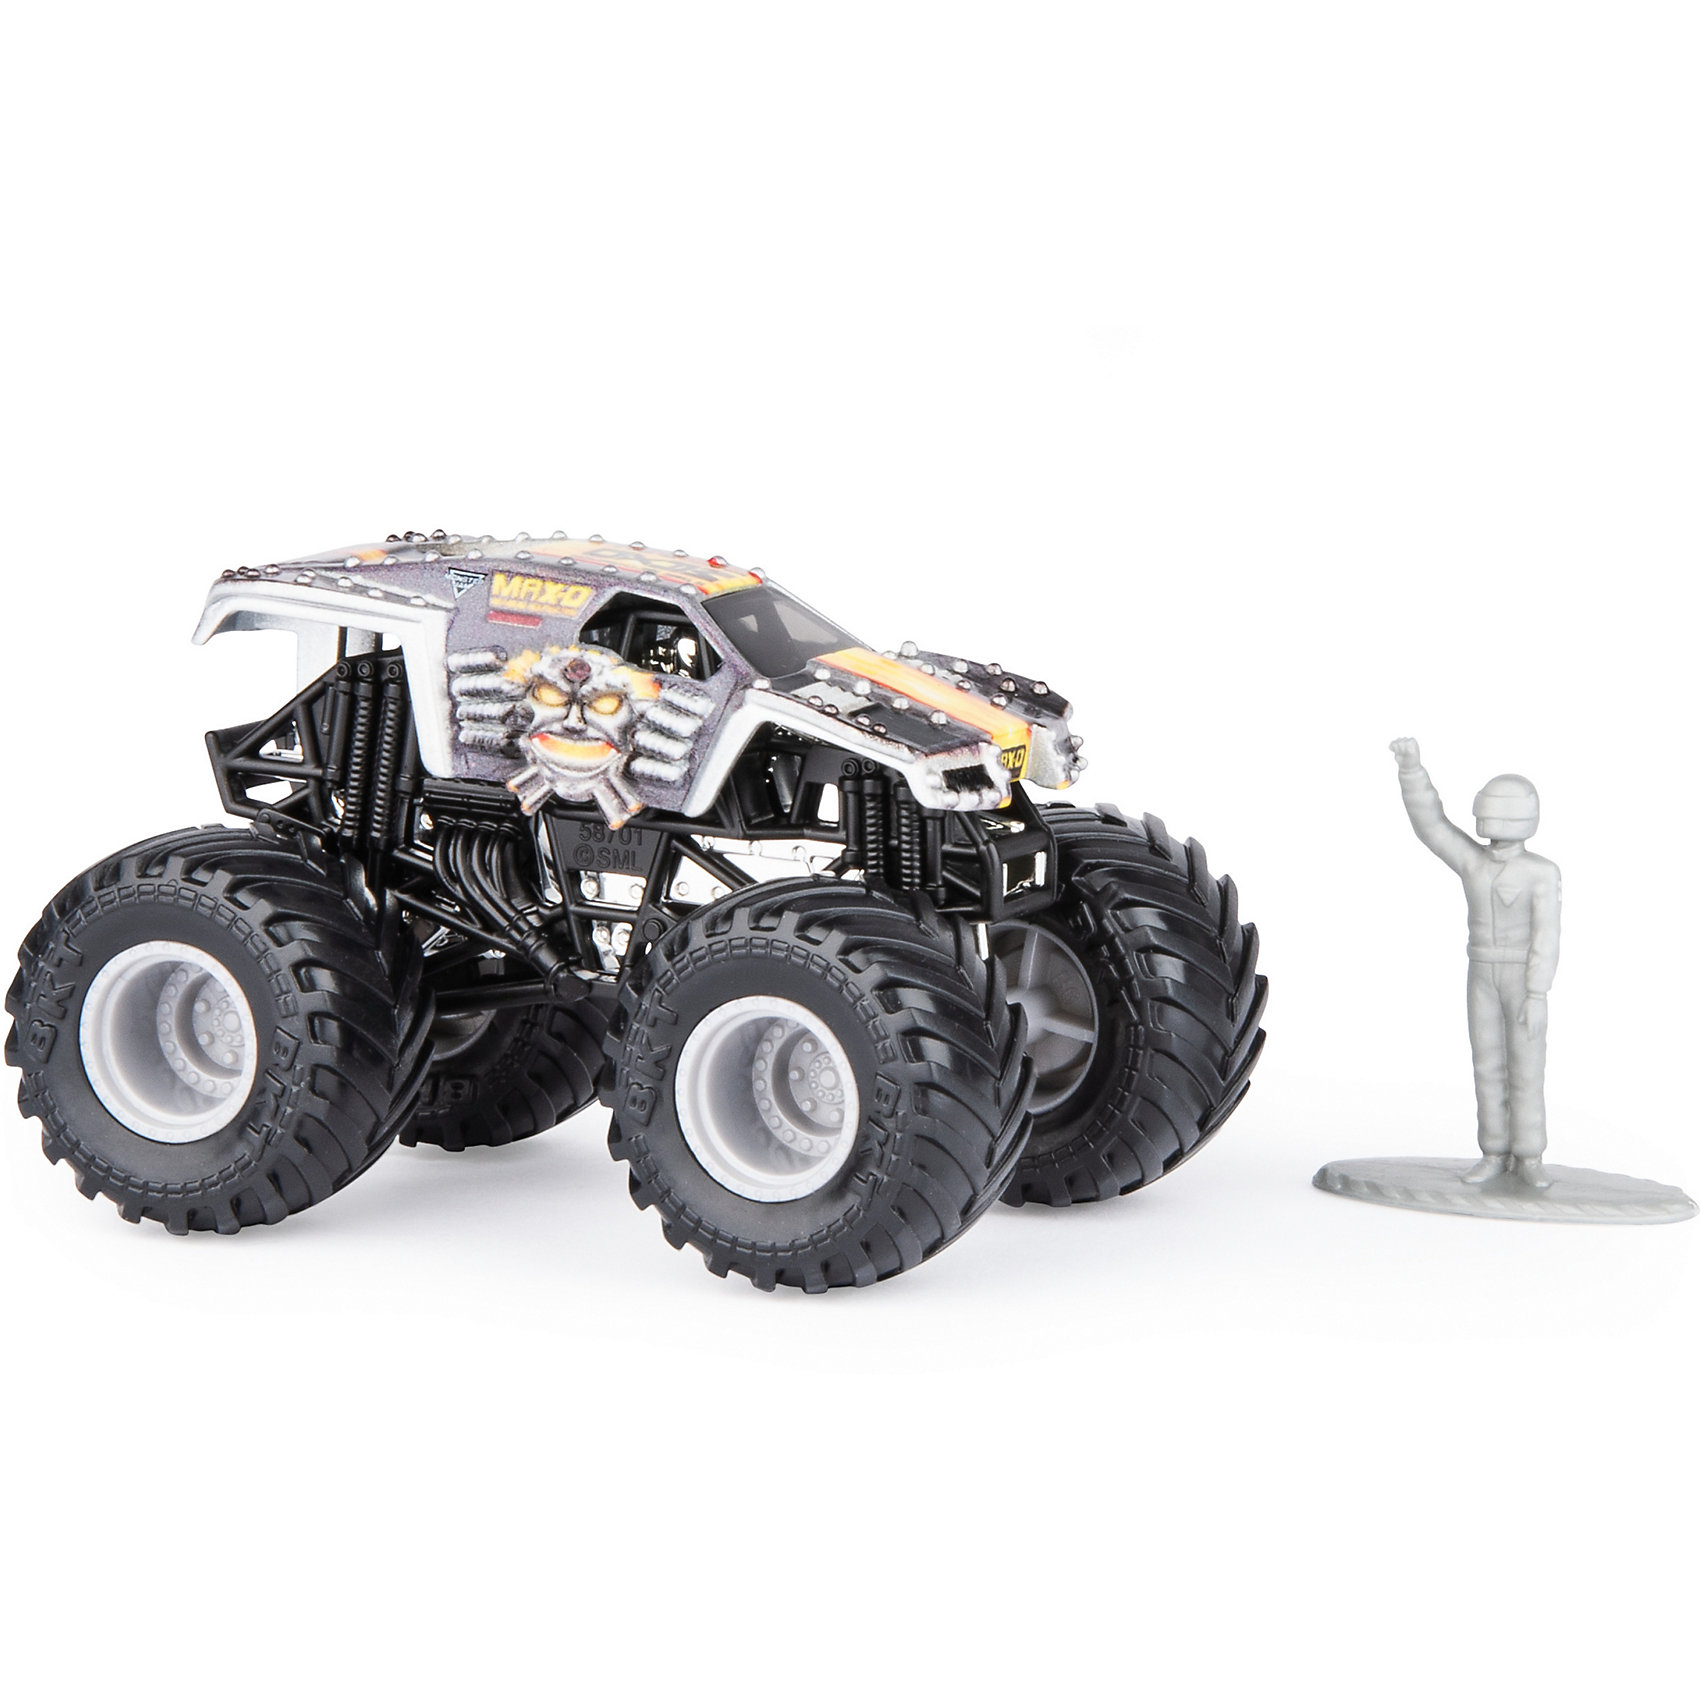 Мини-машинка Monster Jam Max-D Spin Master 11222725